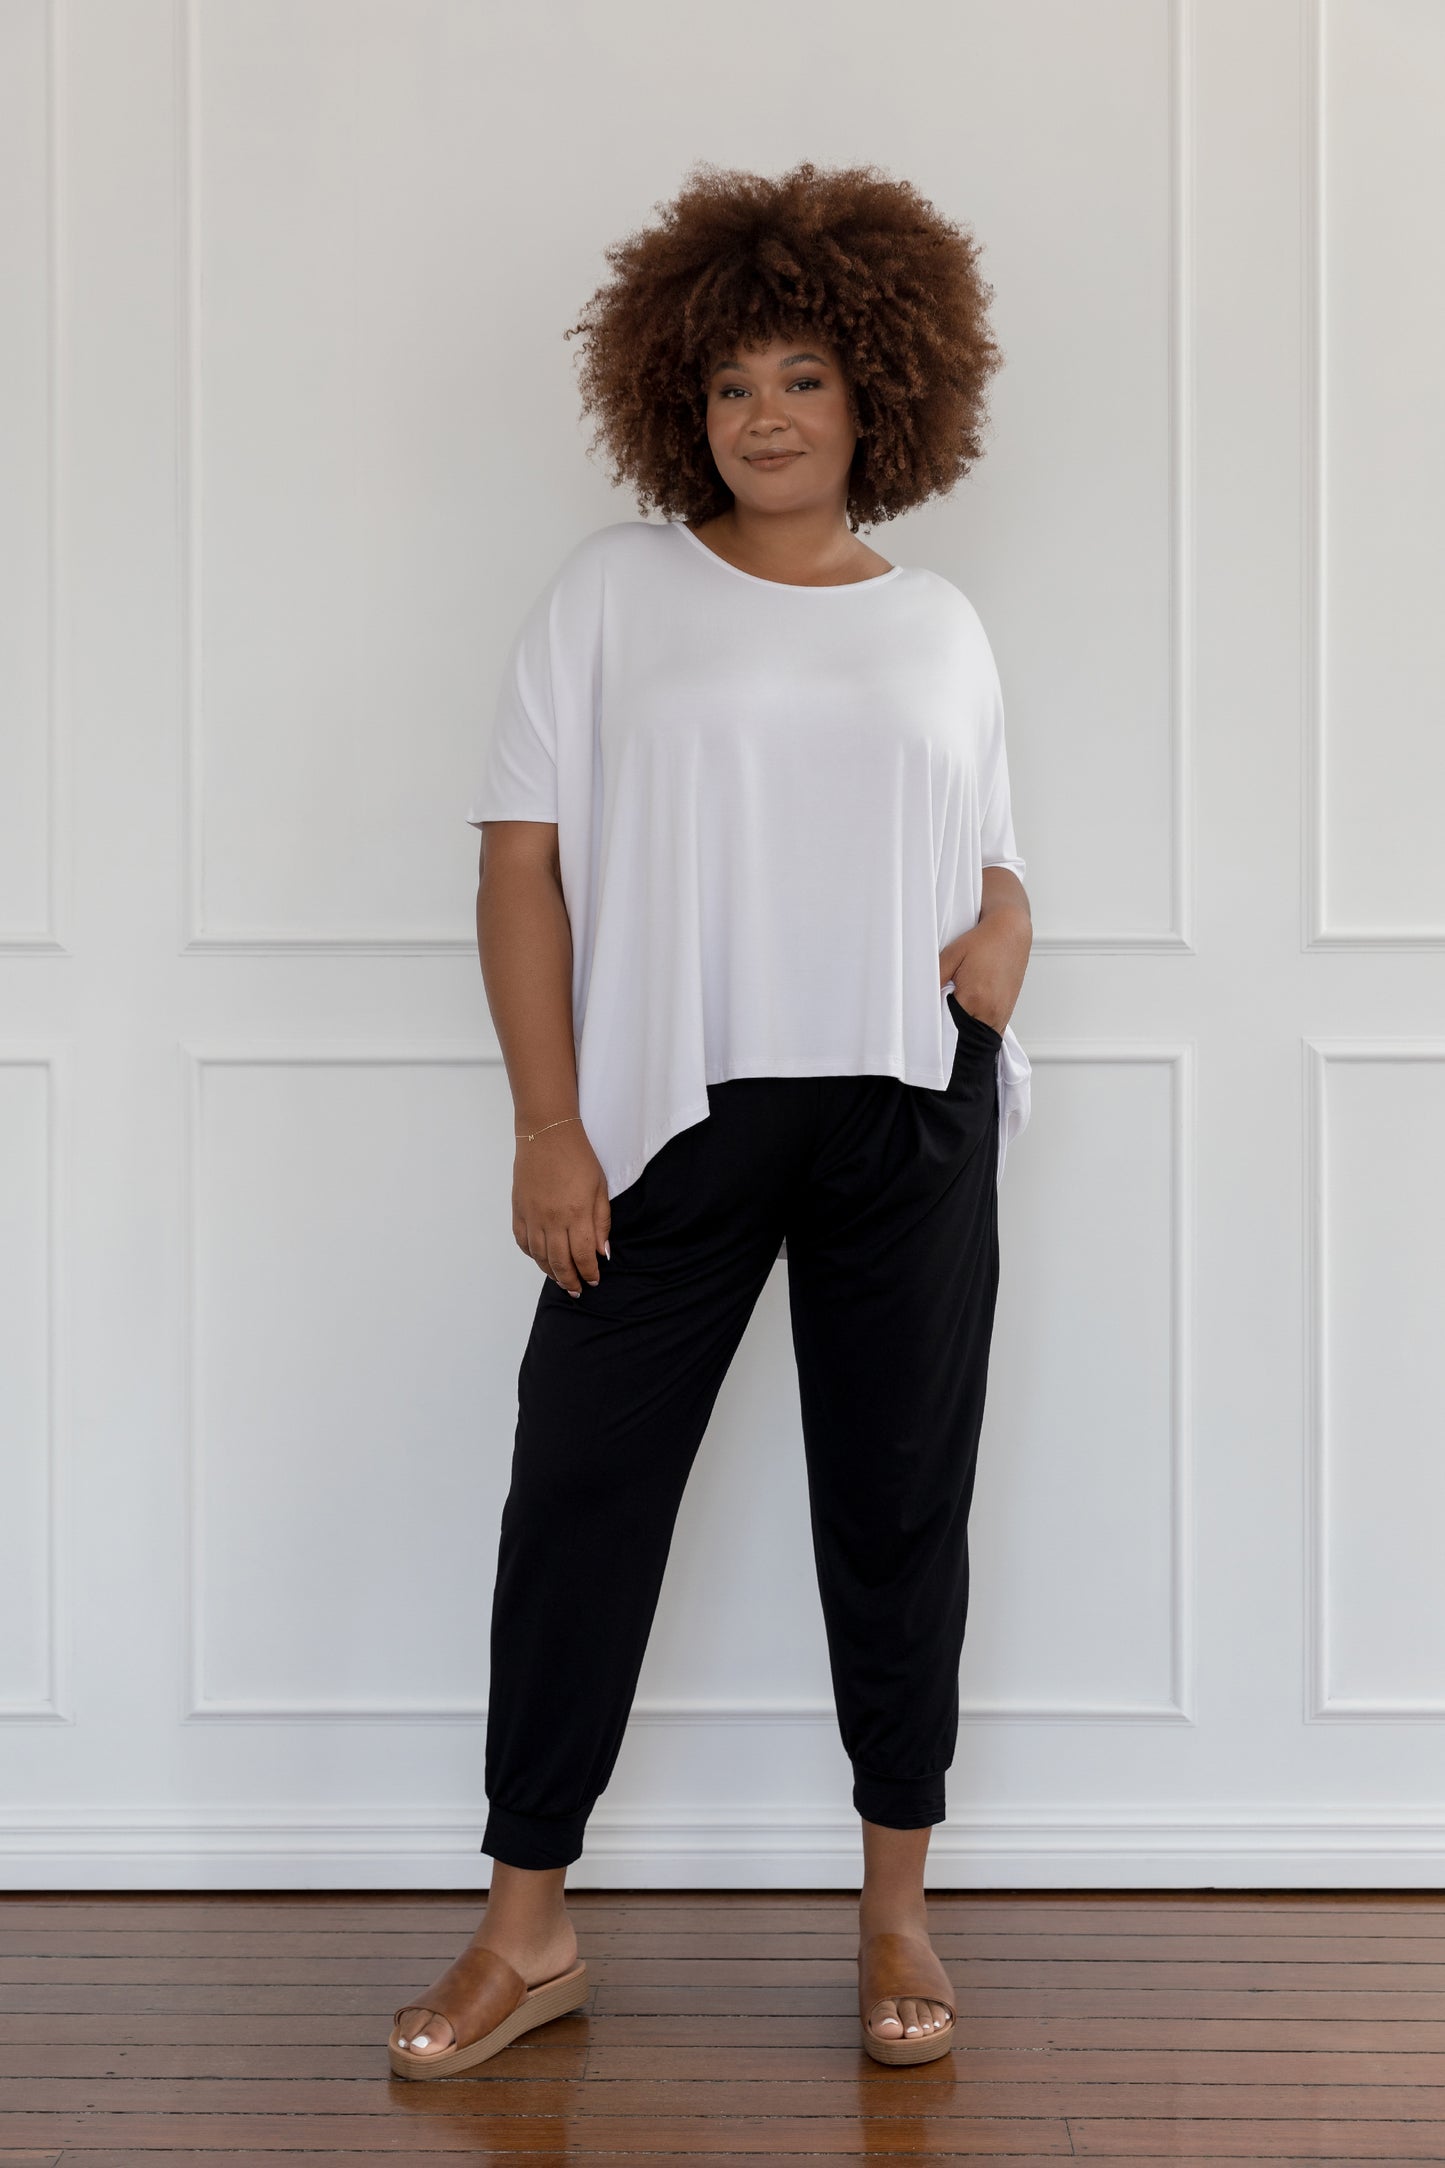 Plus-Sized Black Pants | PQ Collection | Everyday Pant